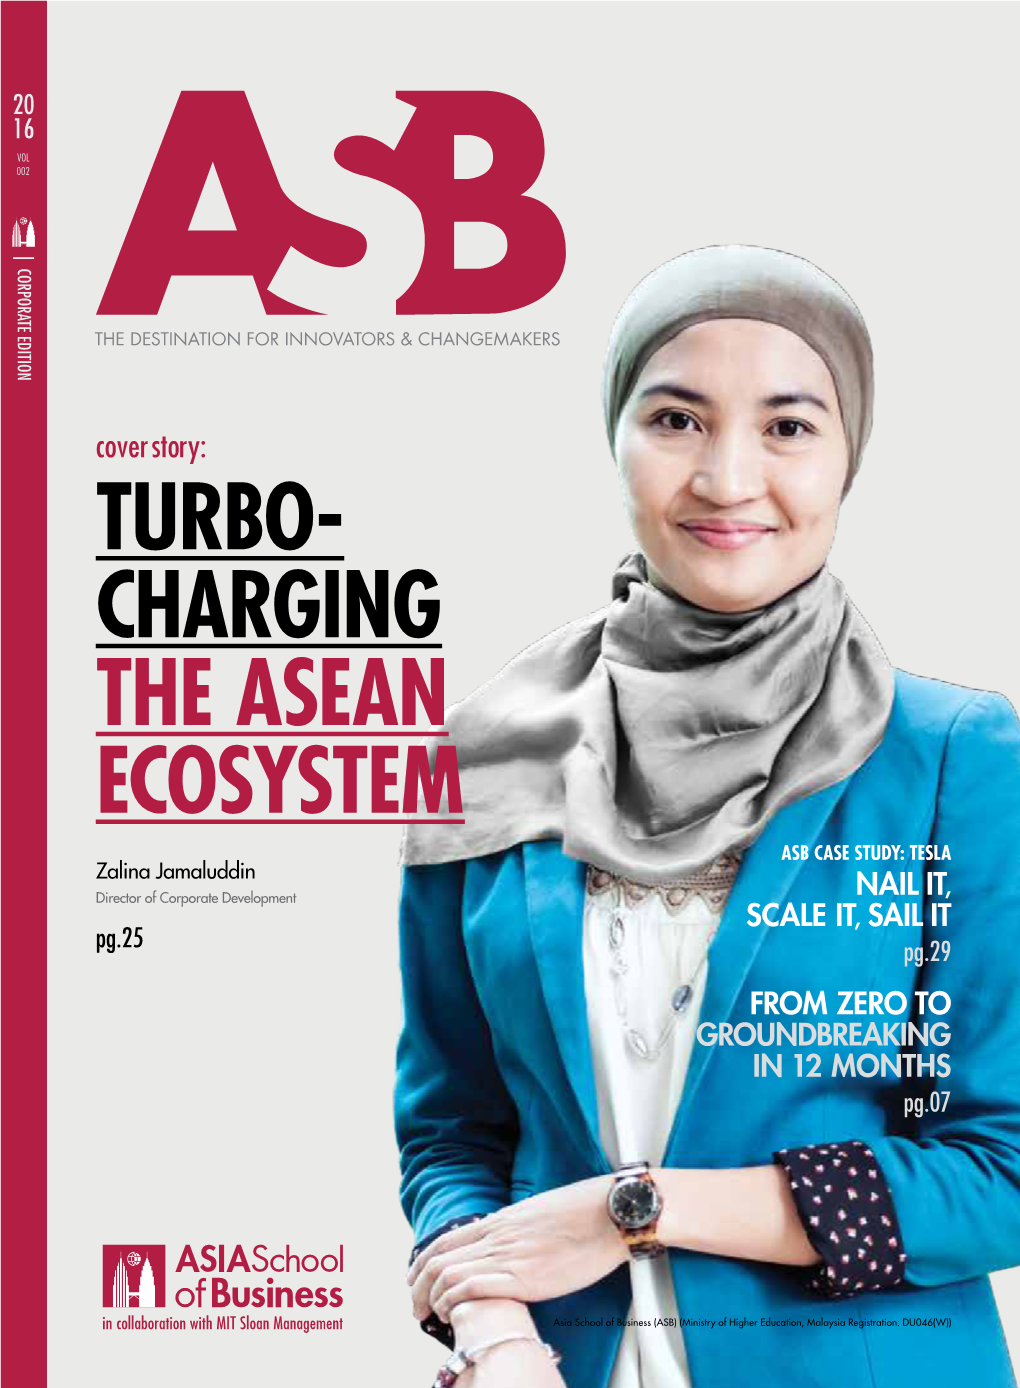 Charging the Asean Ecosystem